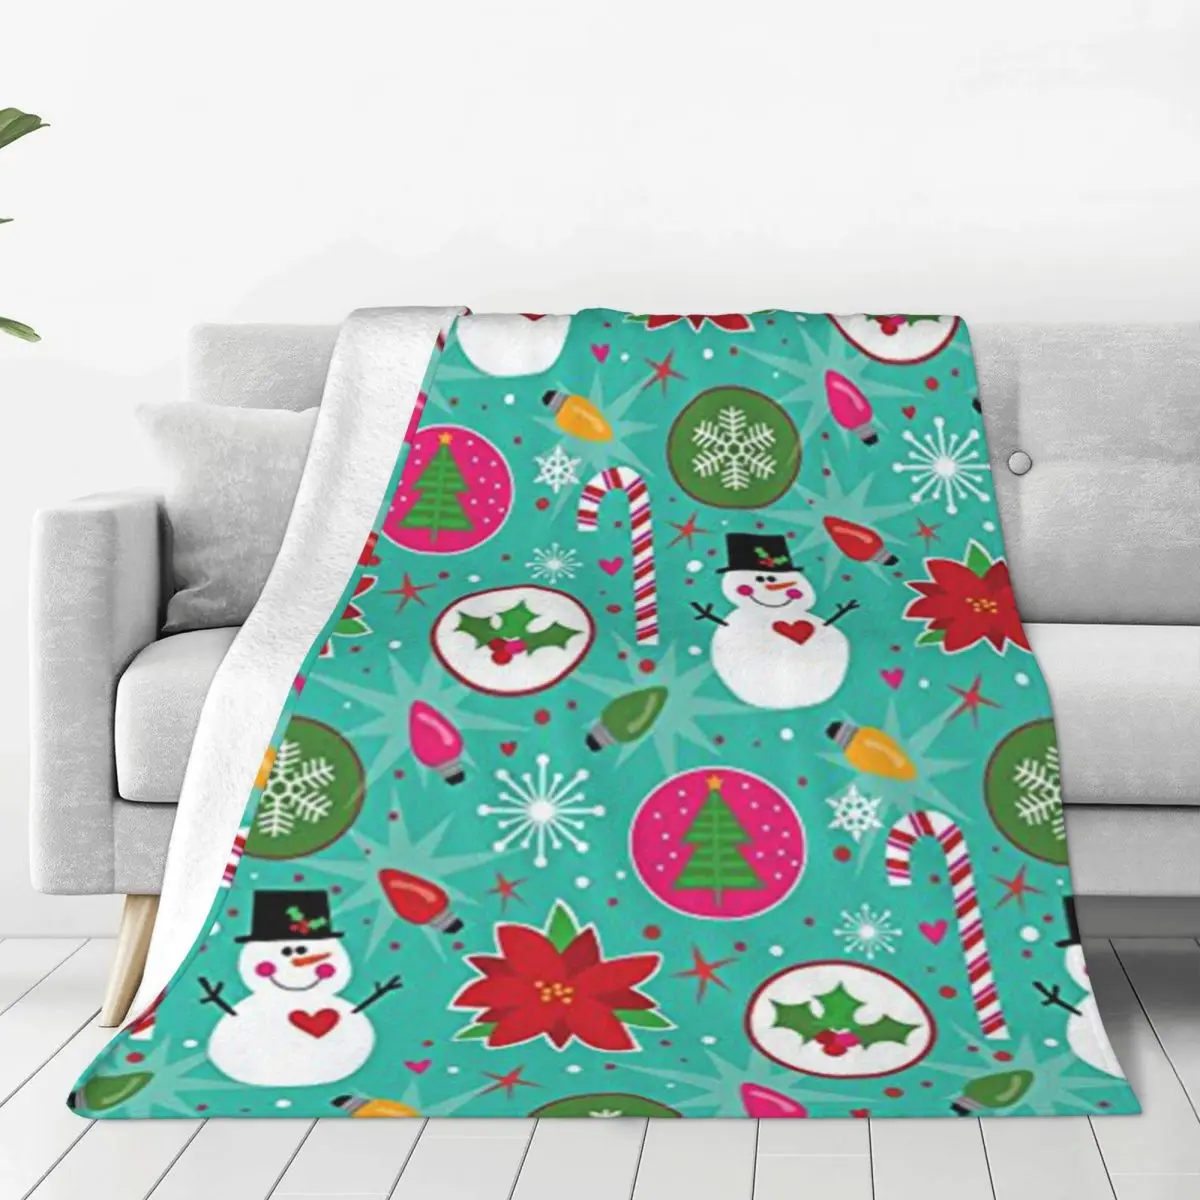 

Christmas Snowman Soft Fleece Throw Blanket Warm and Cozy for All Seasons Comfy Microfiber Blanket for Couch Sofa Bed 40"x30"